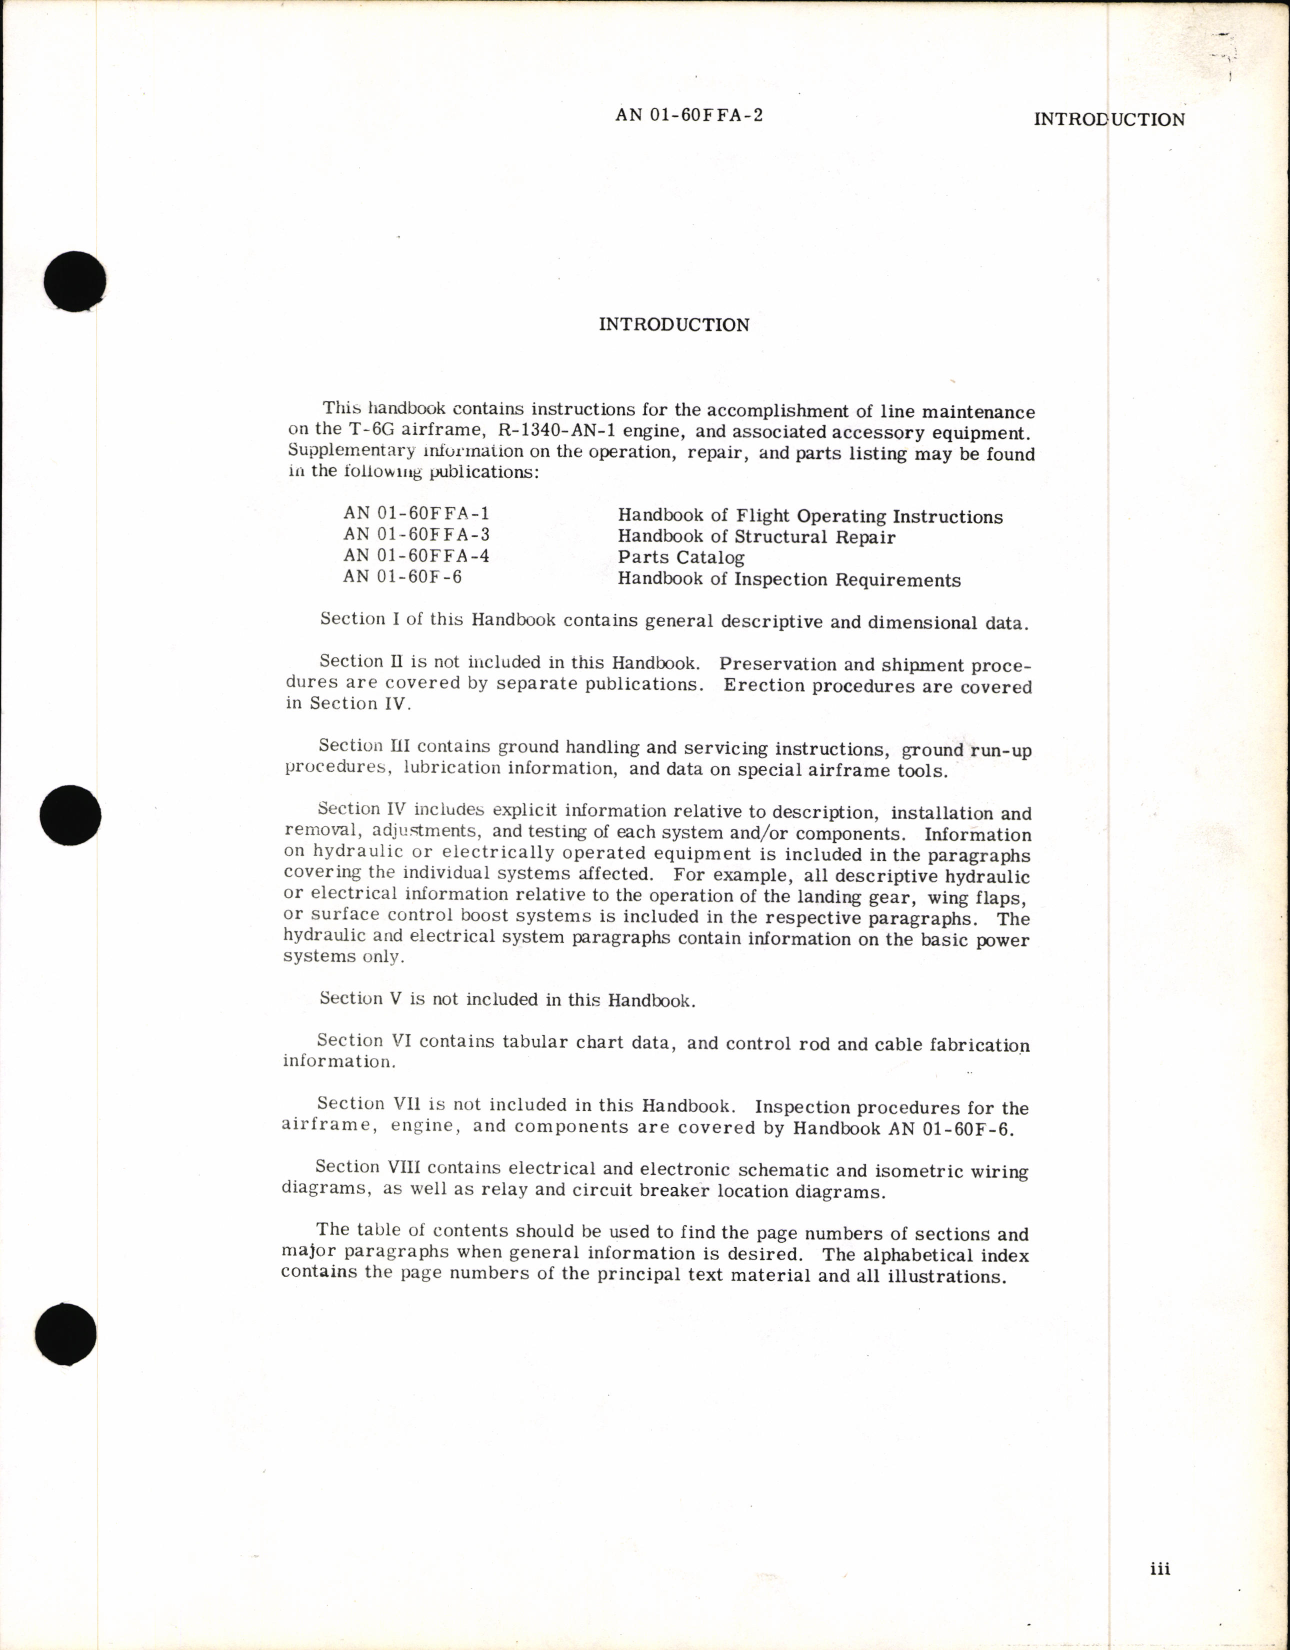 Sample page 1 from AirCorps Library document: Erection and Maintenance Instructions for T-6G